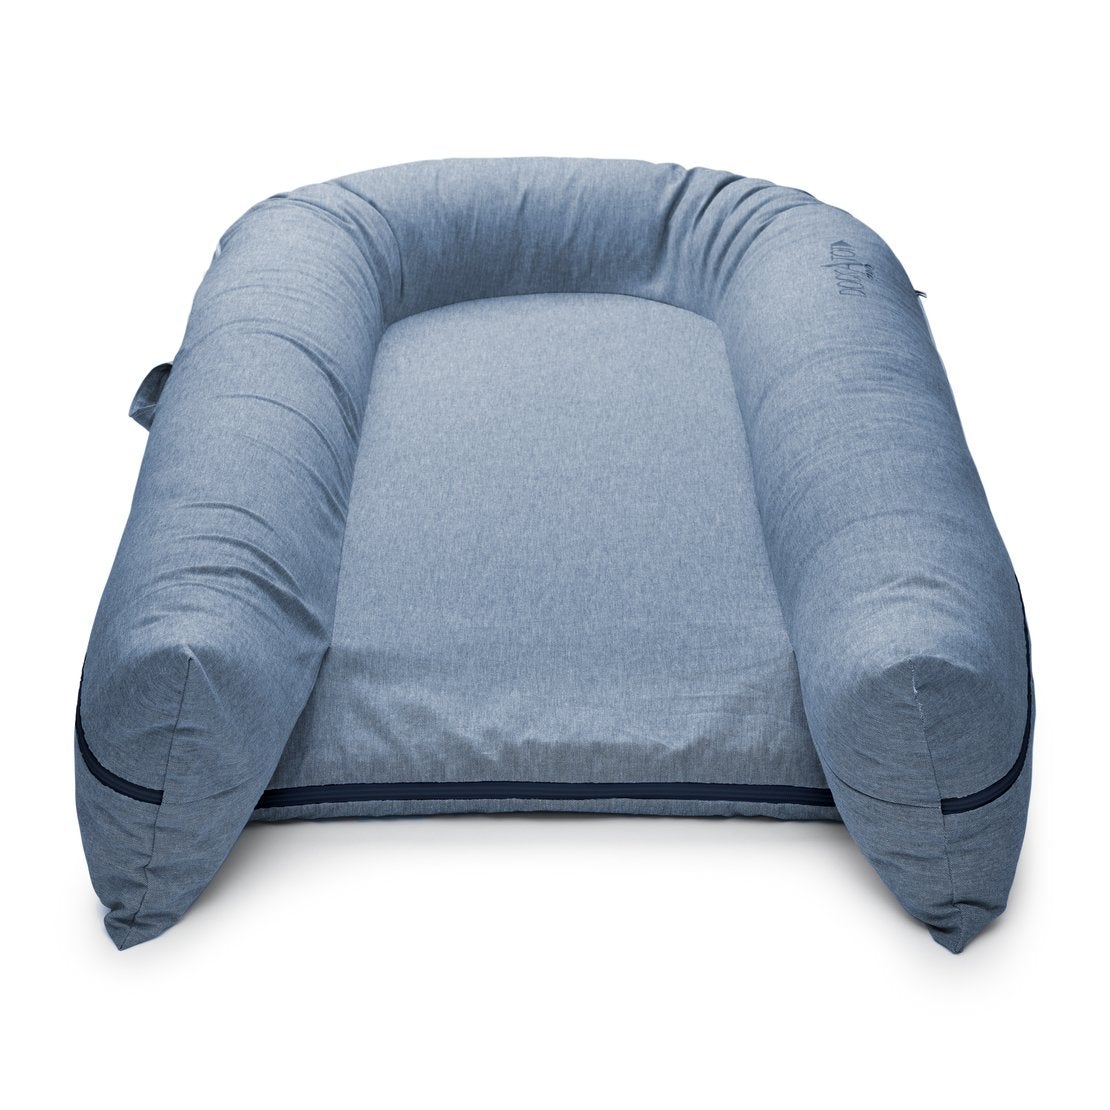 DockATot Grand Dock, Perfect for Lounging and Playtime, Chambray, -- ANB Baby